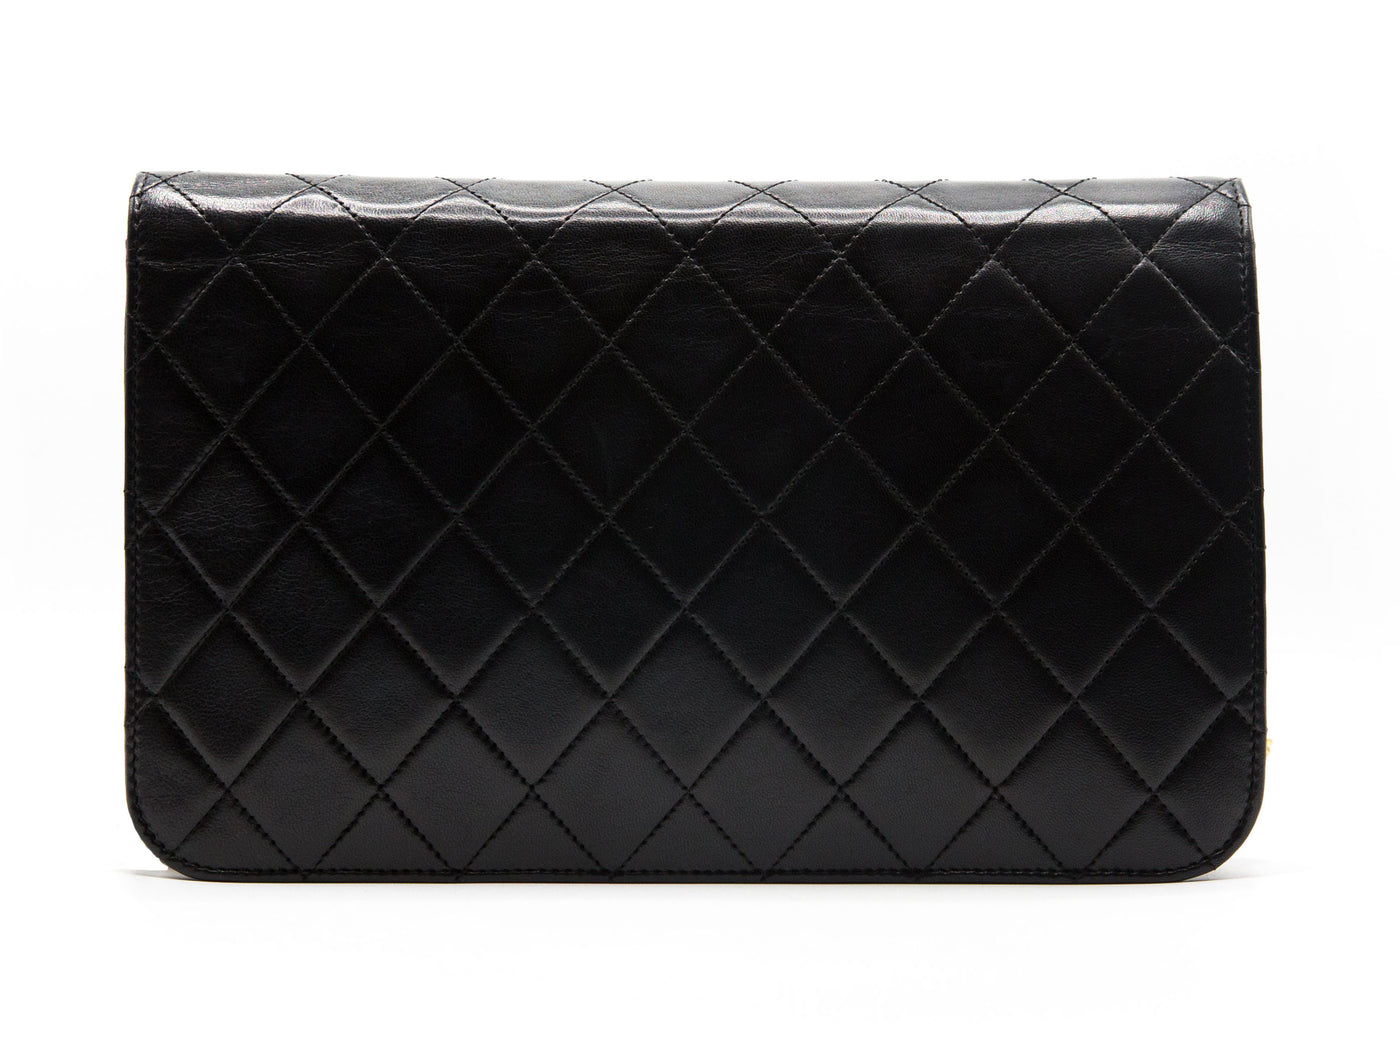 Chanel 119 Chanel 10 Classic Black Quilted Leather Shoulder Flap Bag